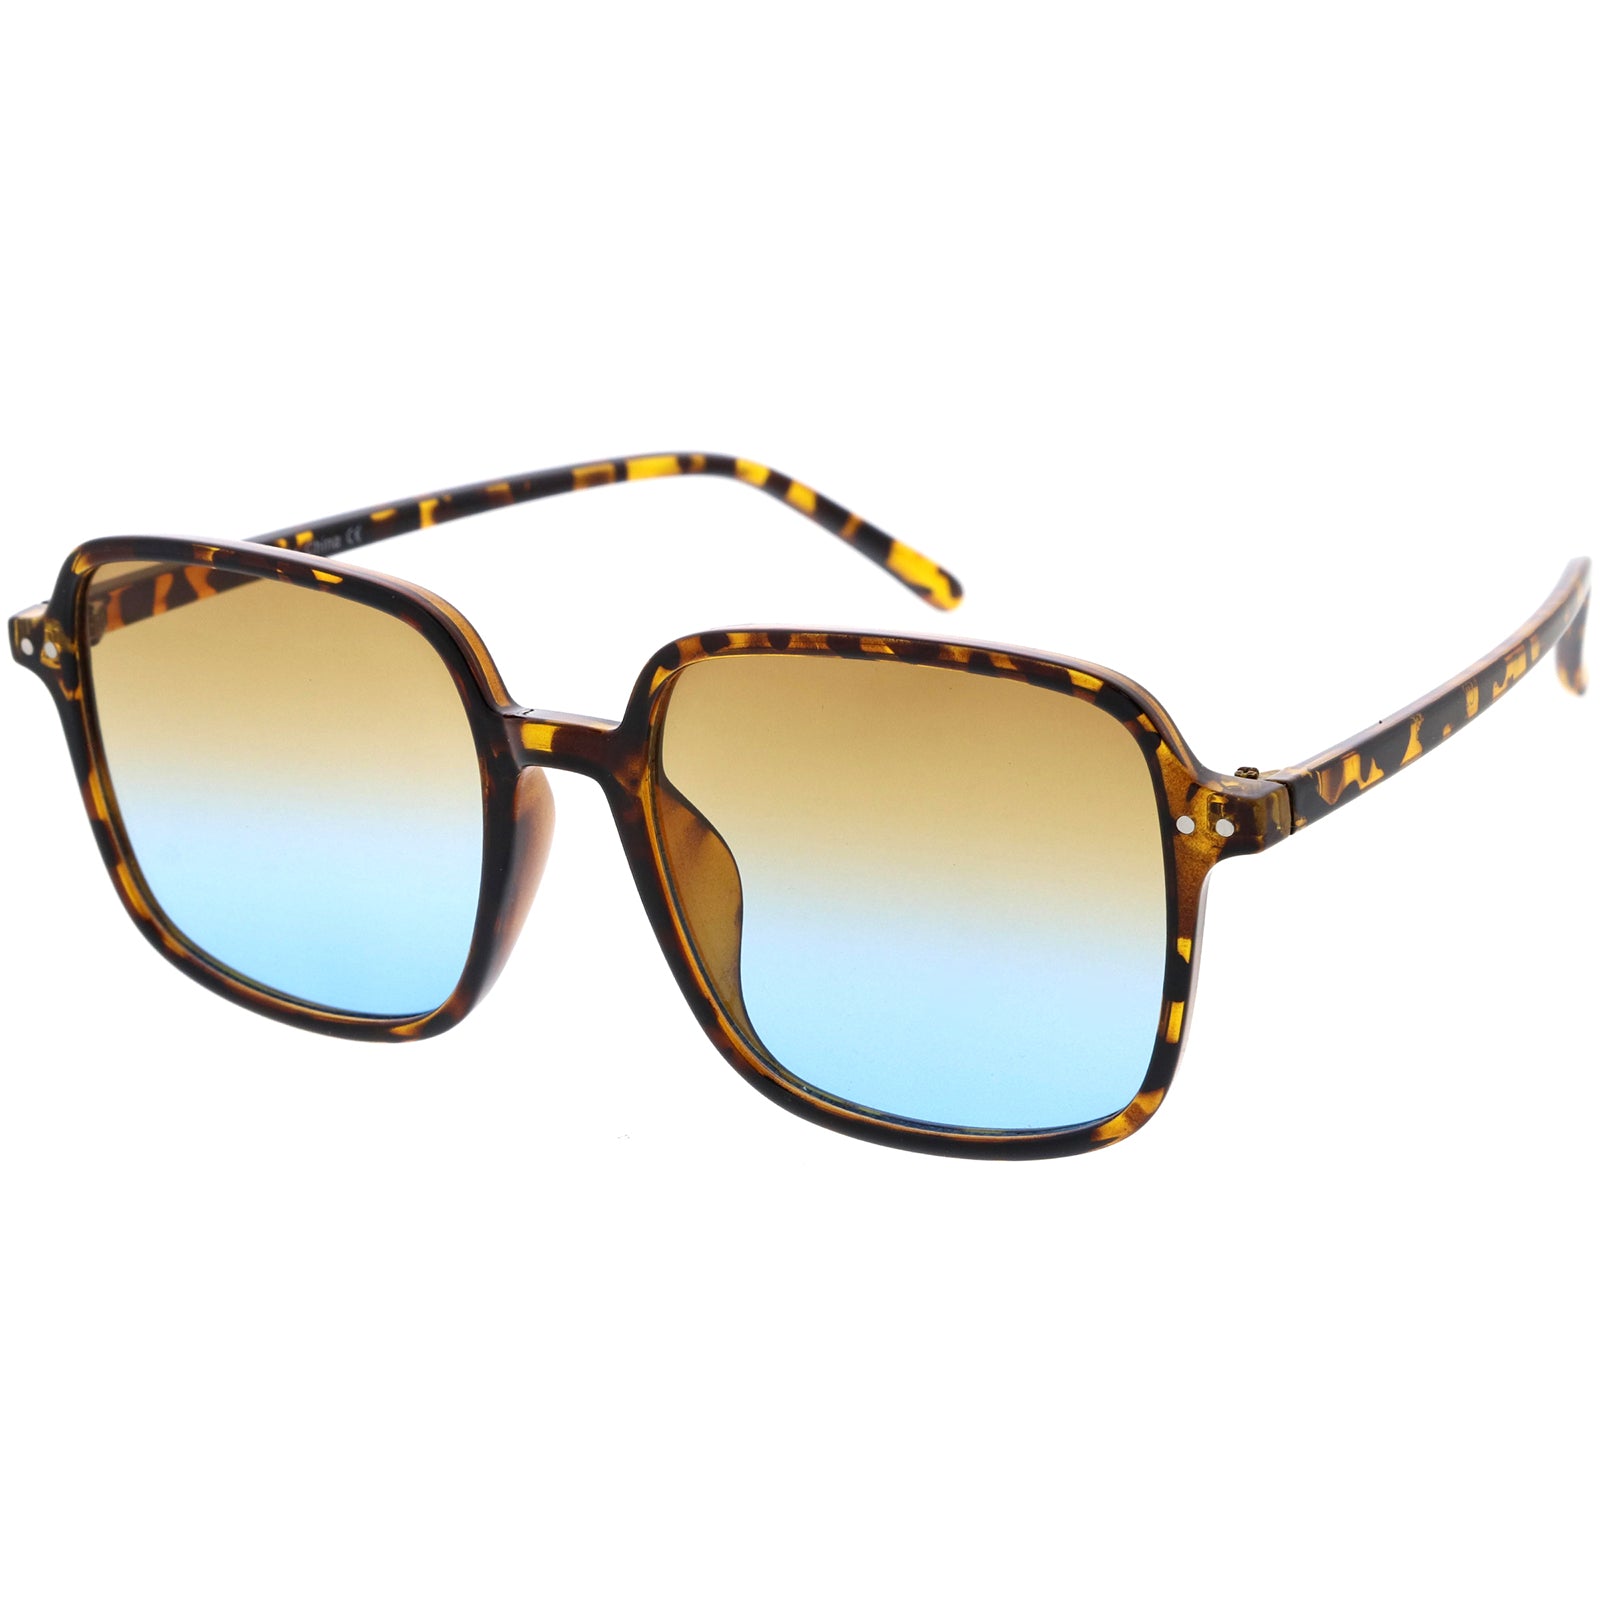 Everyday Chic Mid Temple Square Oversized Sunglasses 57mm